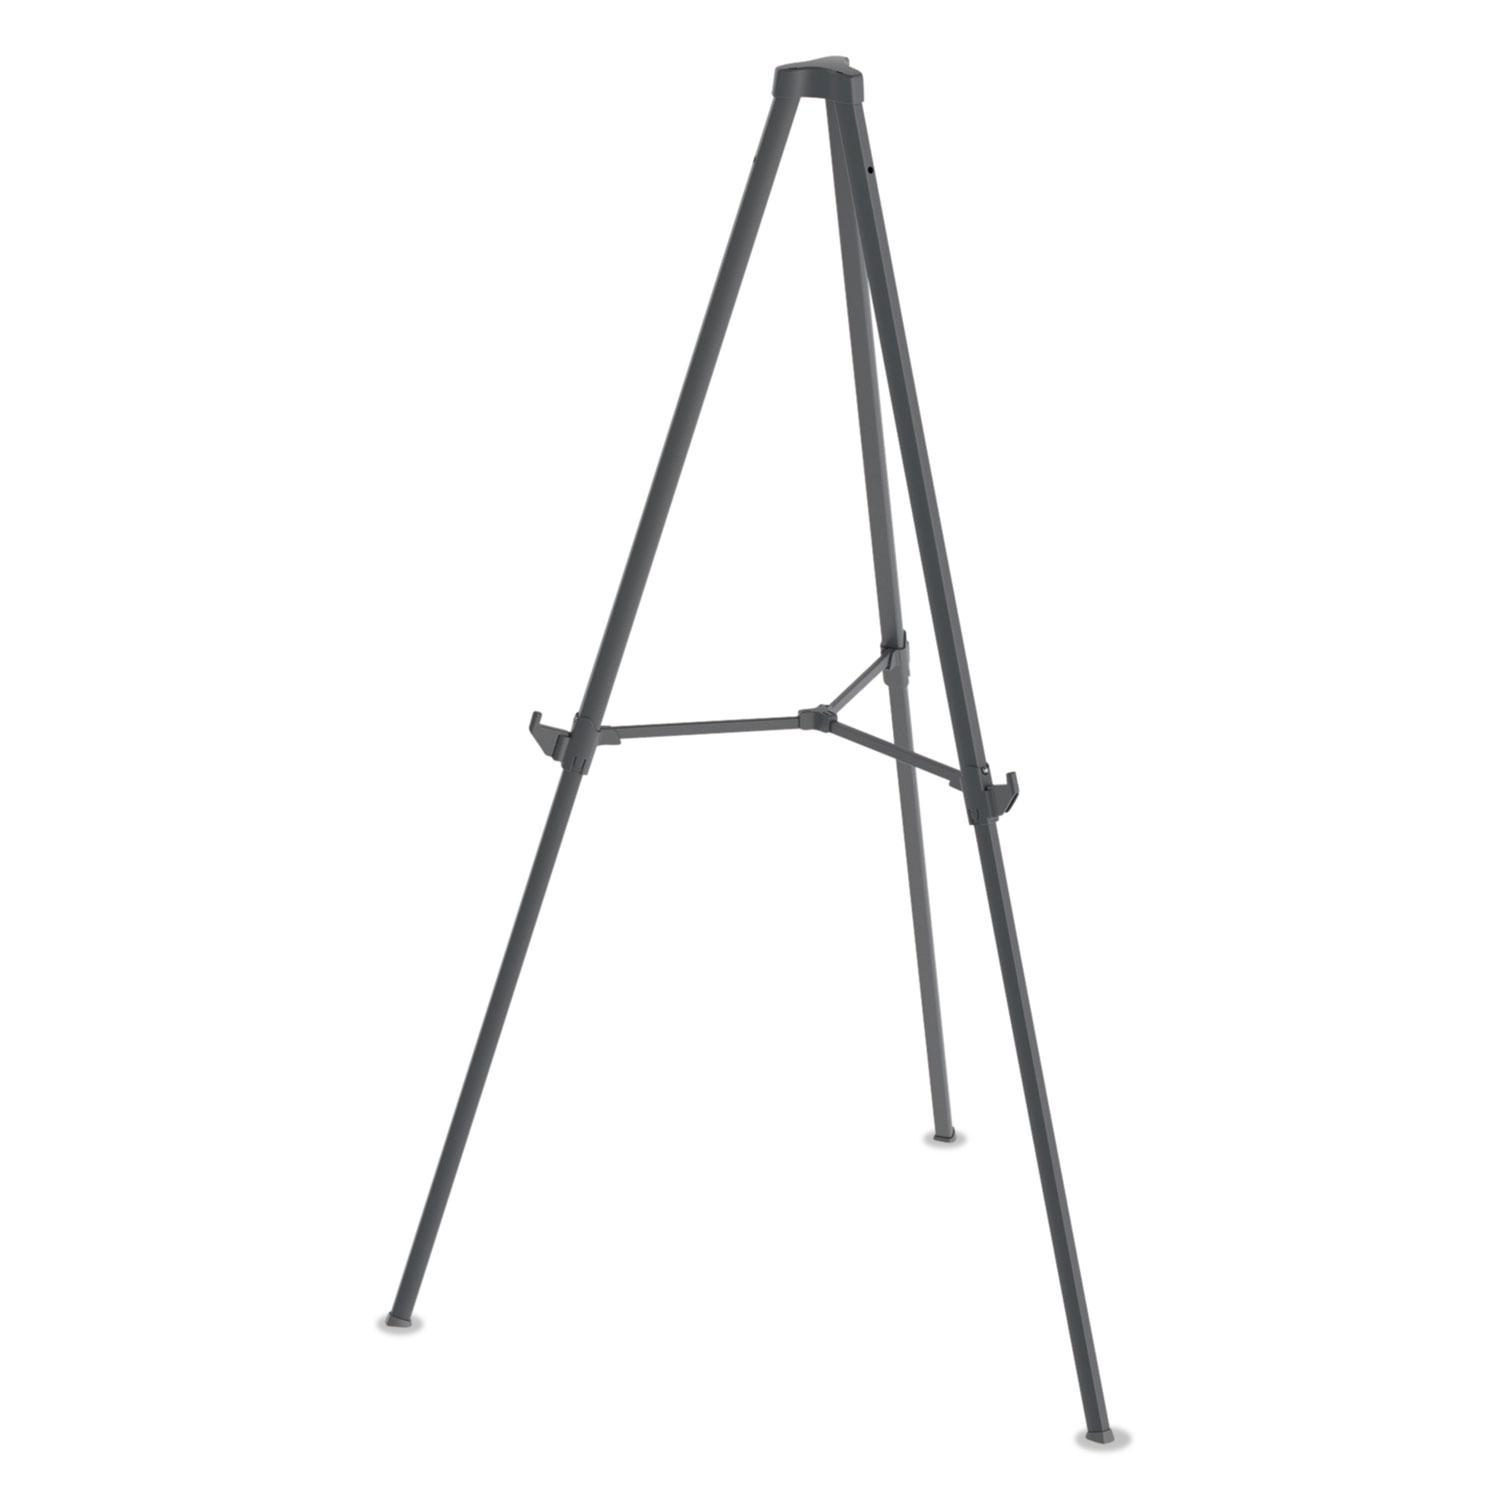 Floor Display Easel, Portable and Lightweight, Height-Adjustable Bars for  Displaying Signs of Varying Sizes, Tripod Stand for Indoor Use - Black